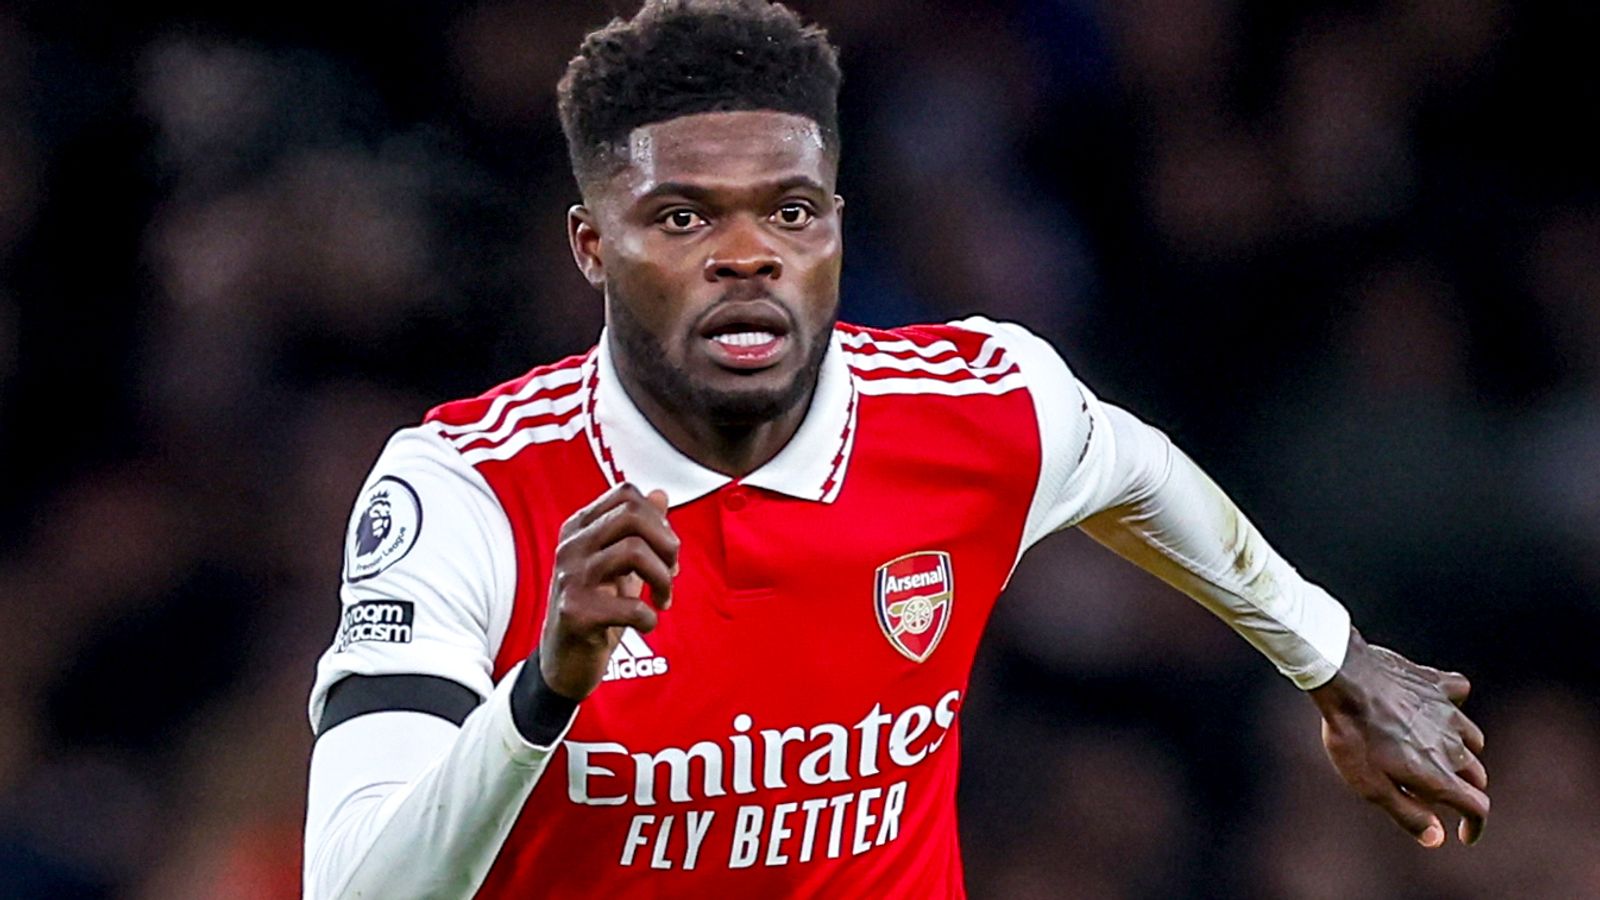 BREAKING: Thomas Partey very likely to leave Arsenal this summer - Fabrizio Romano